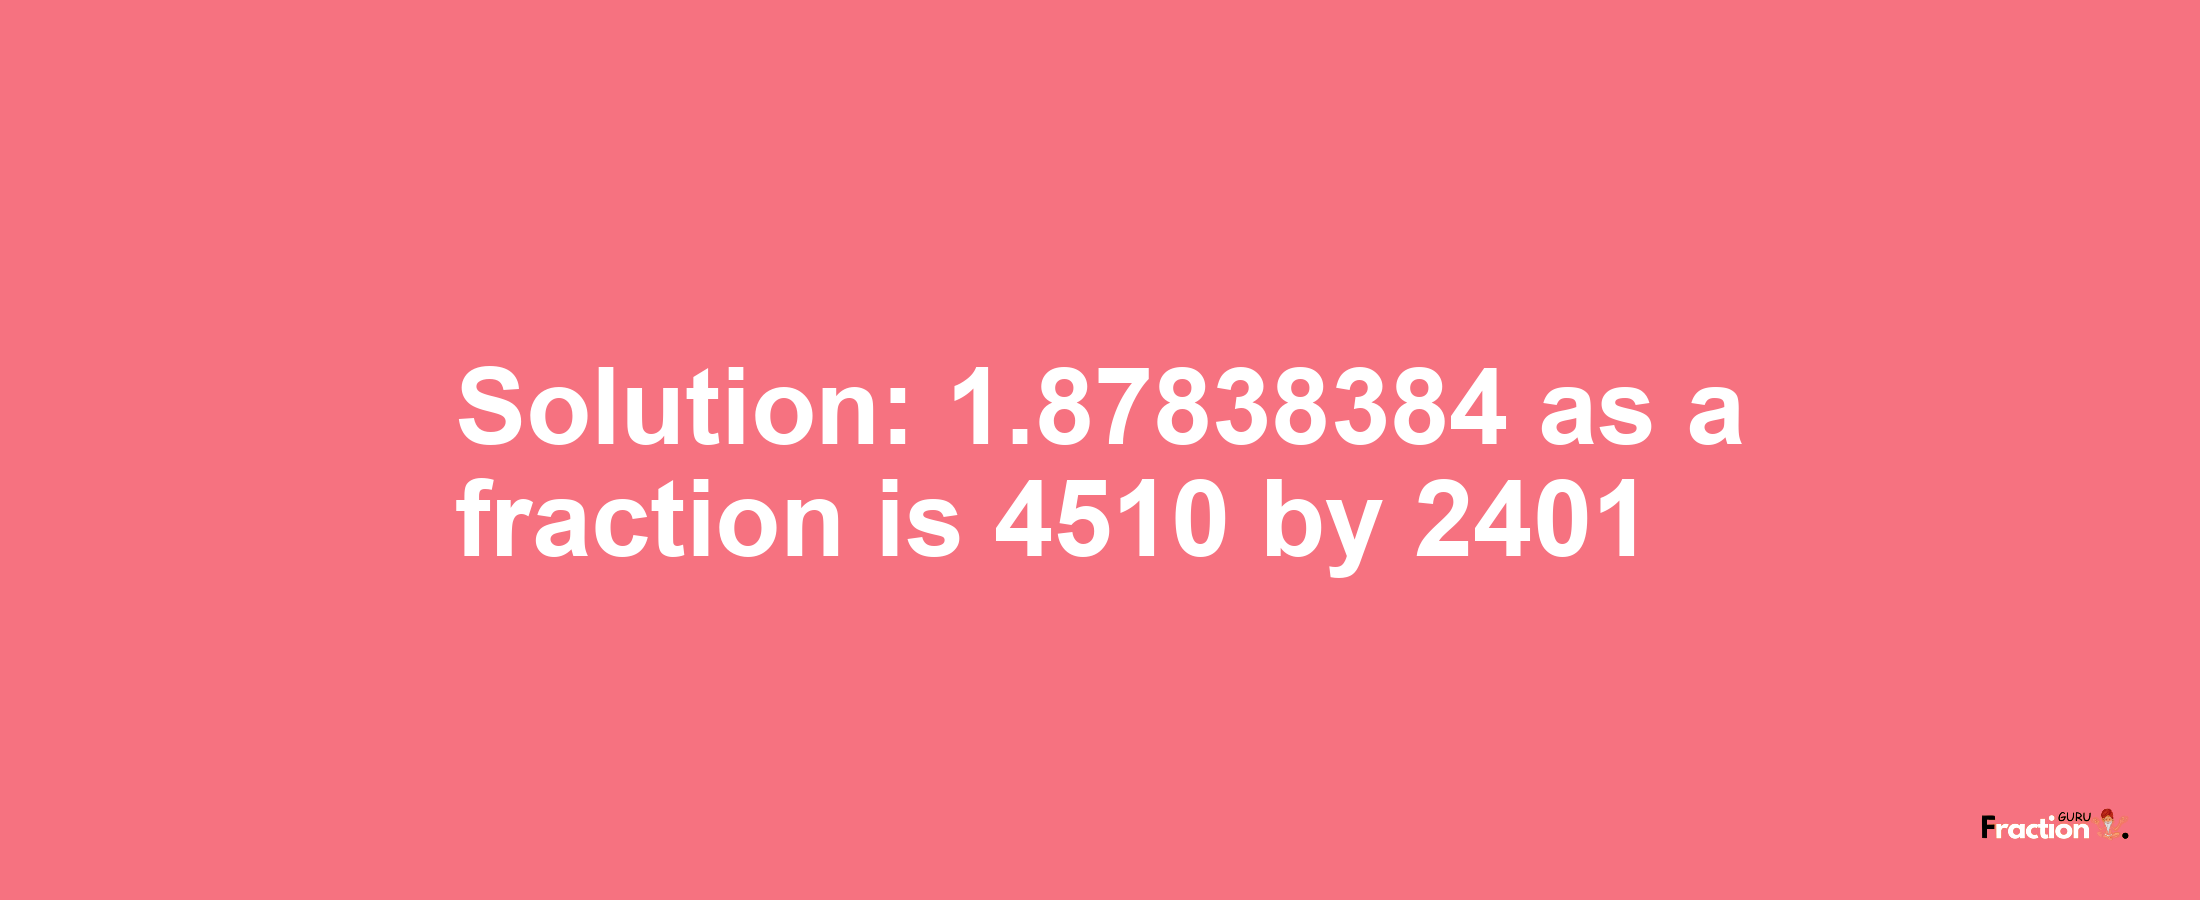 Solution:1.87838384 as a fraction is 4510/2401